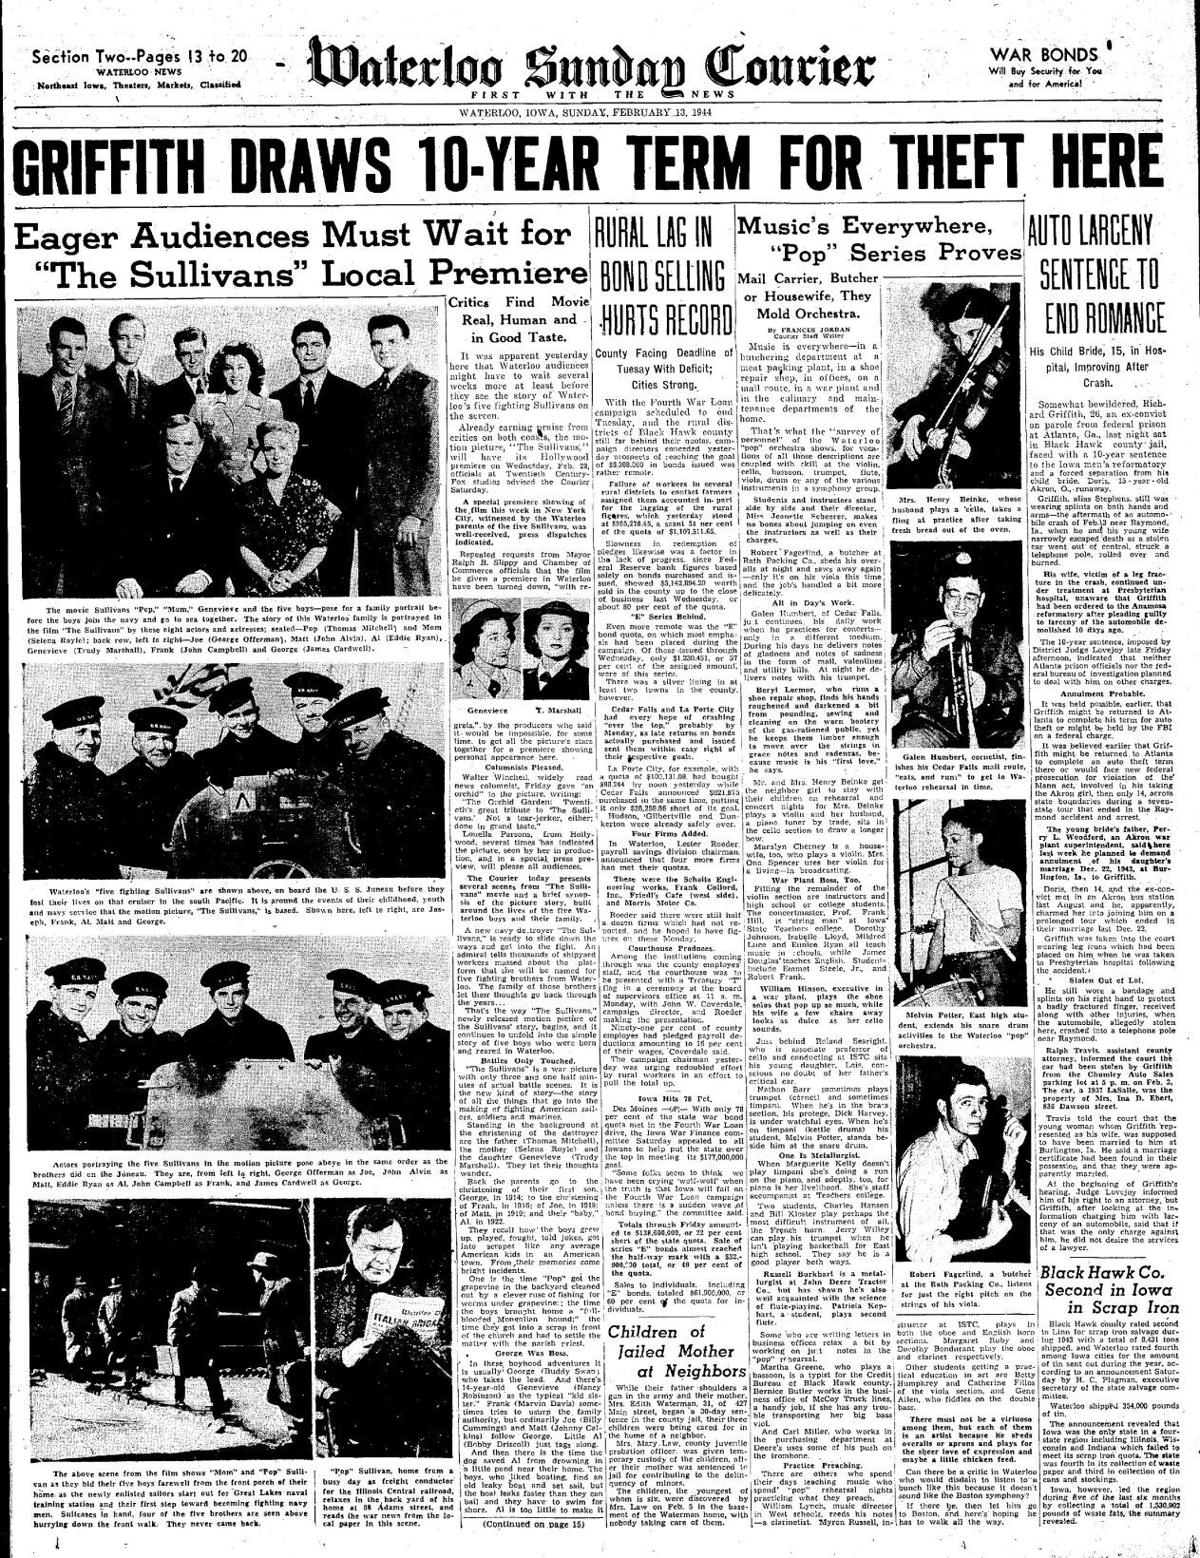 Courier Feb. 13, 1944